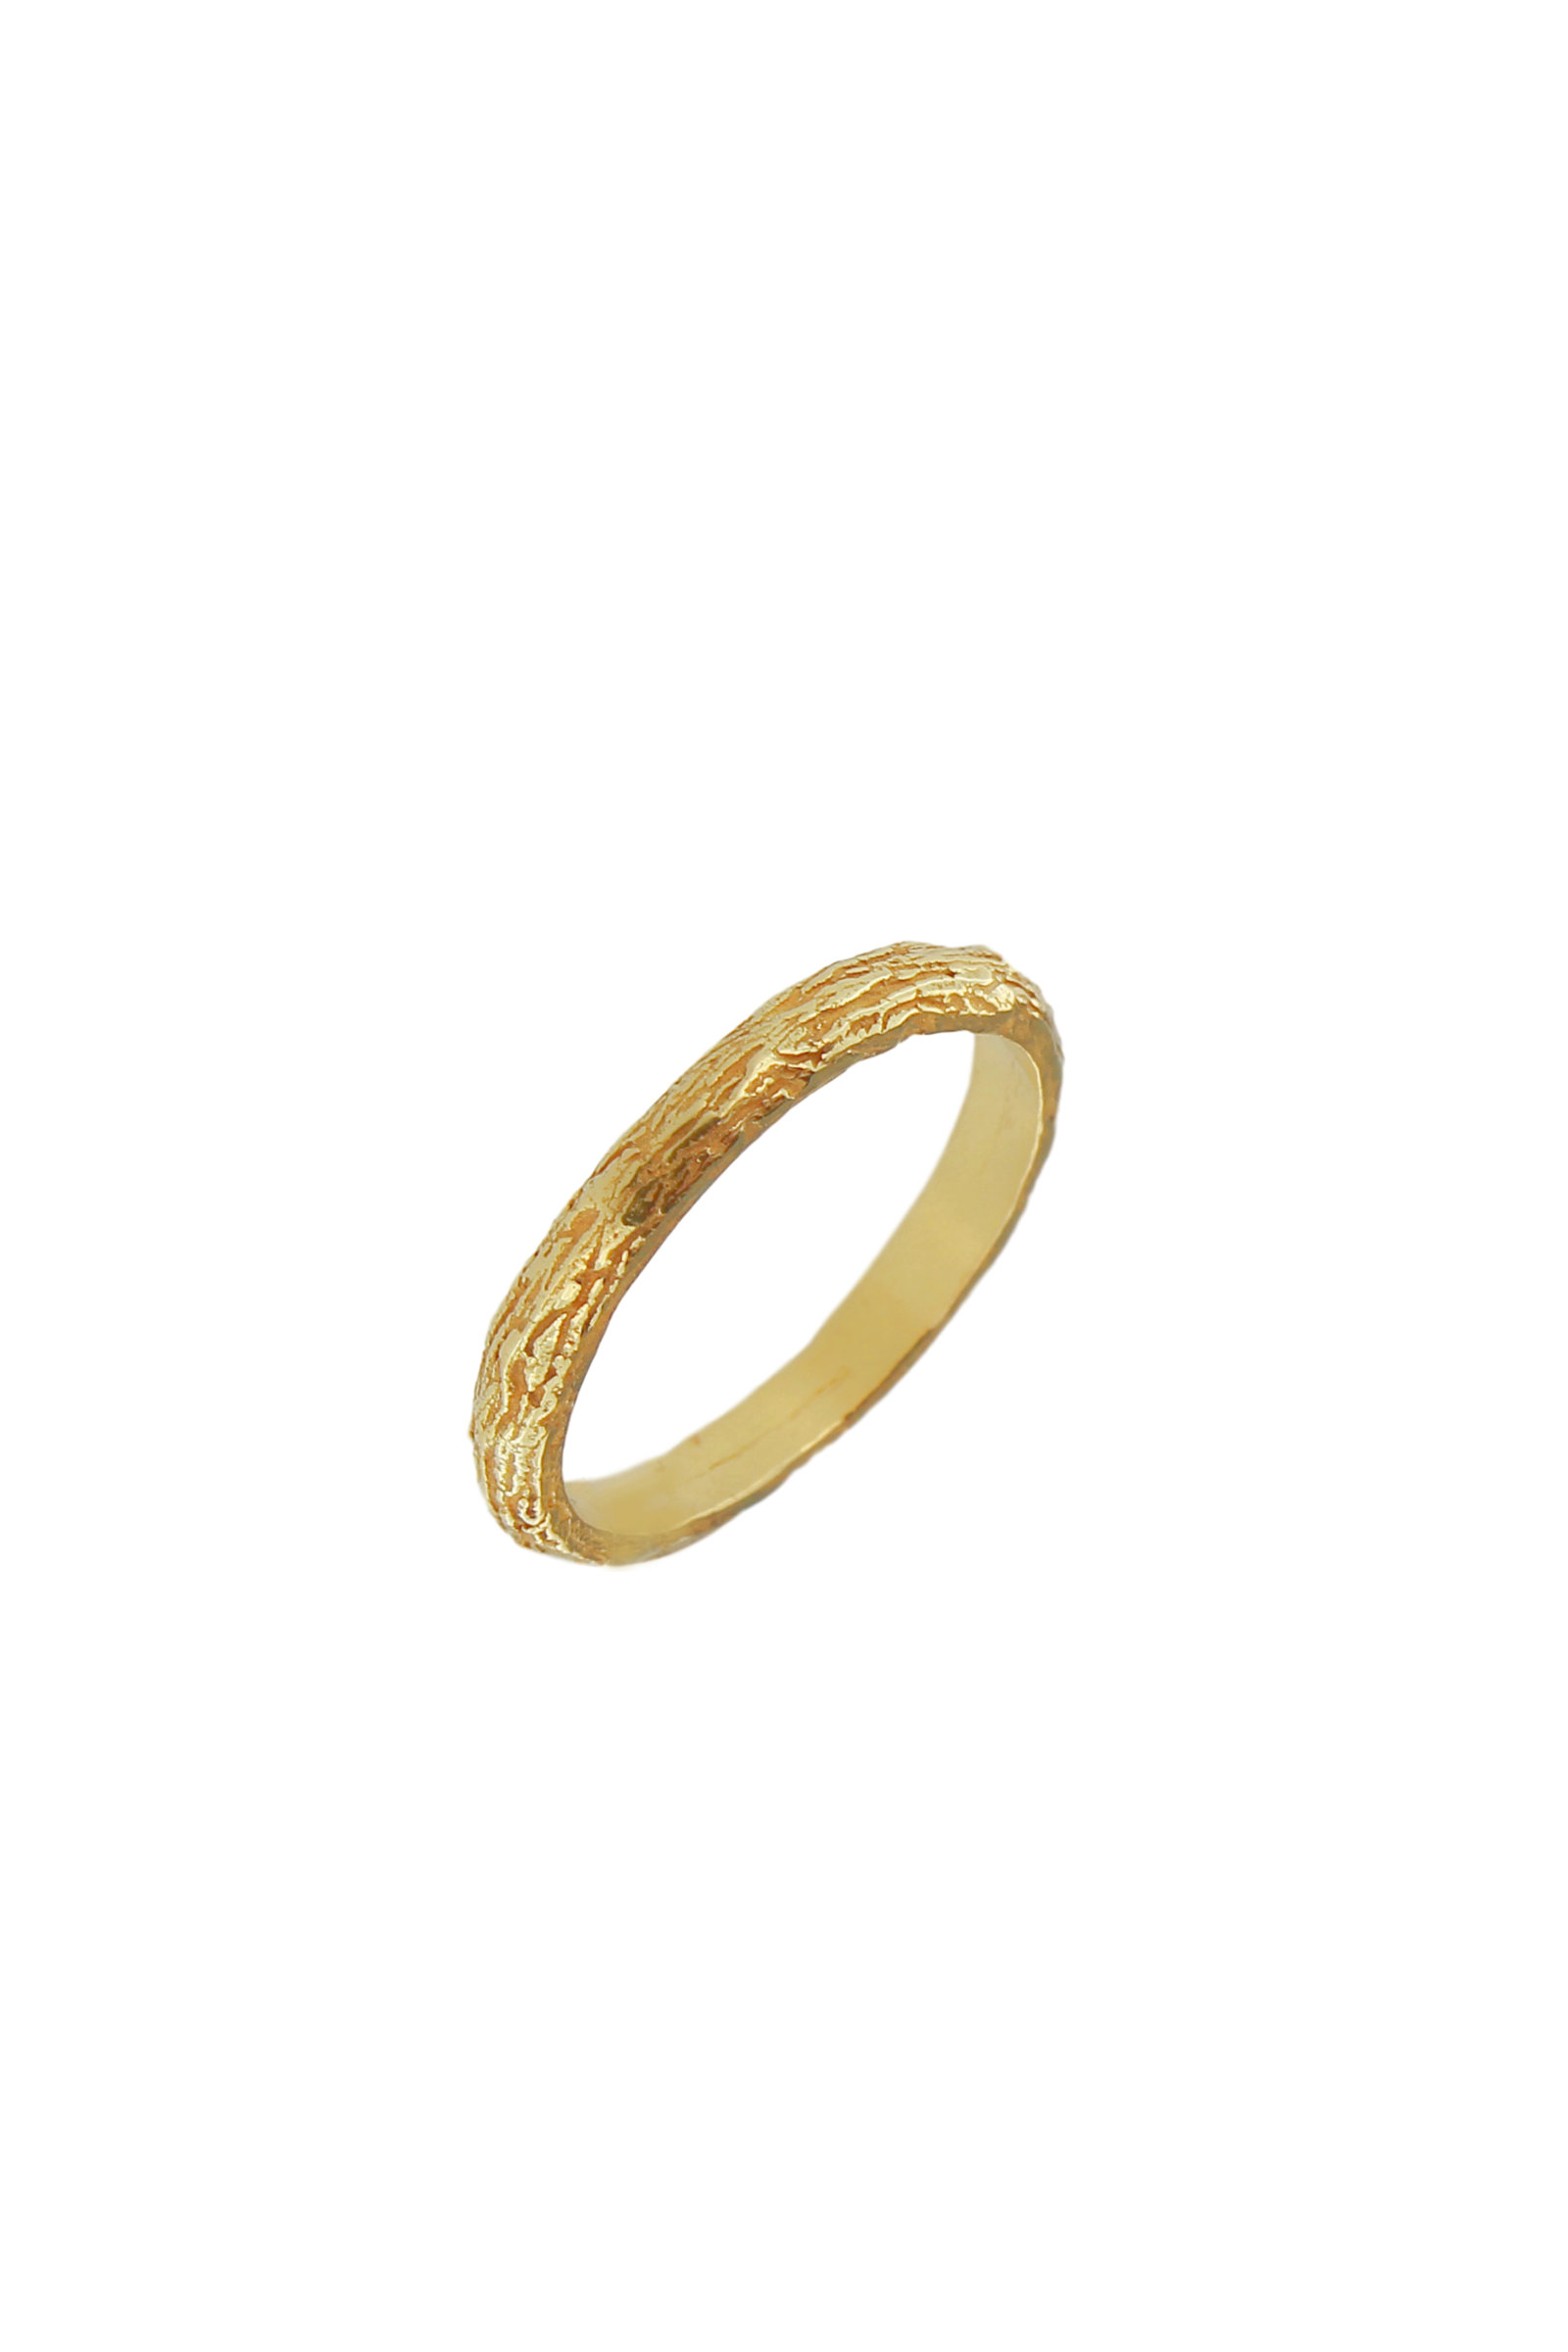 SE9A-18-Kt-Yellow-Gold-Band-Ring-1